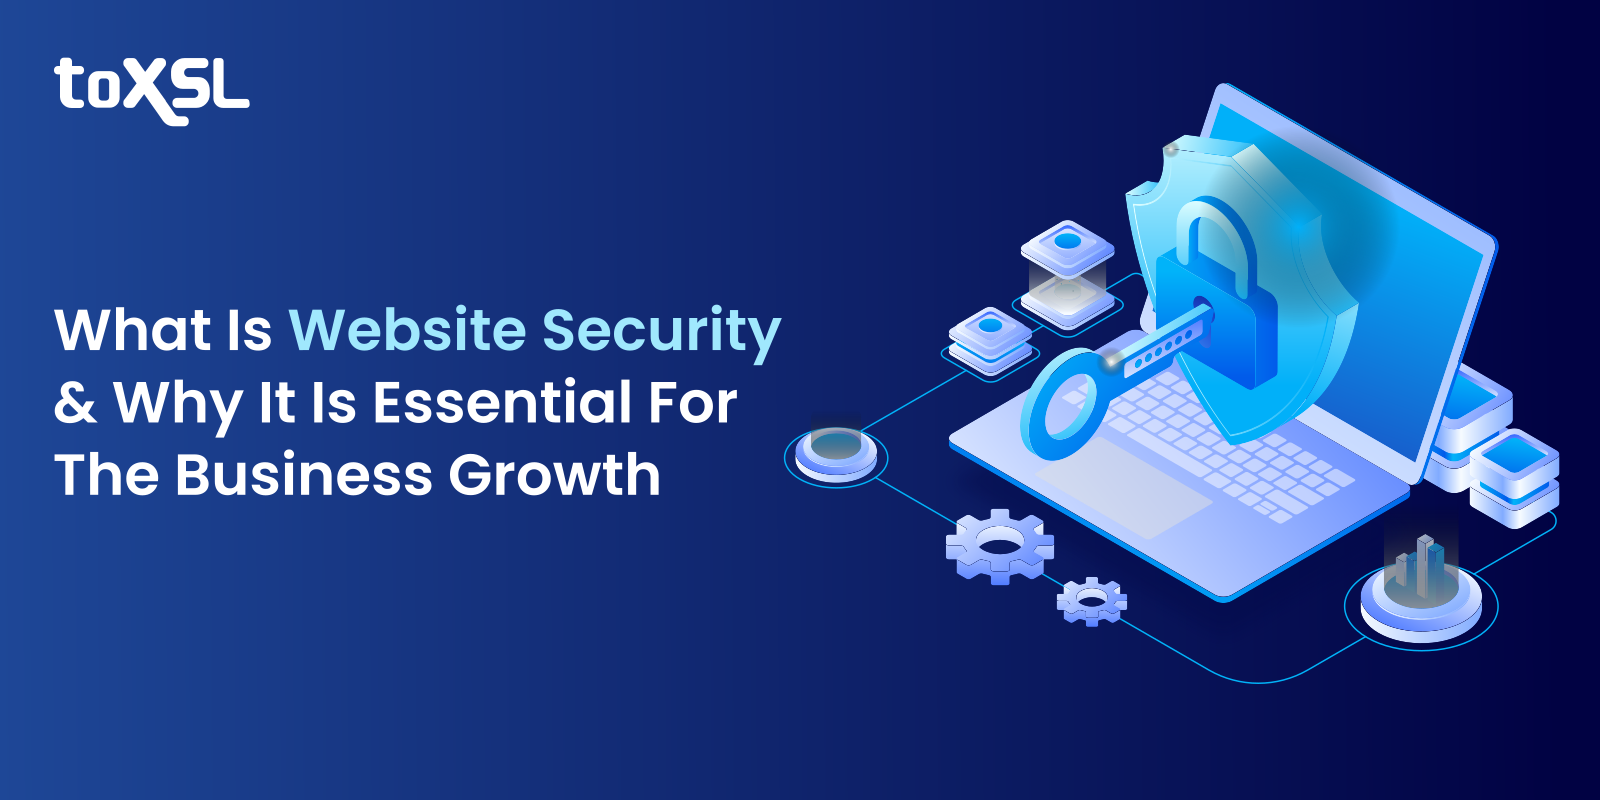 What Is Website Security And Why It Is Essential For Your Business In 2022